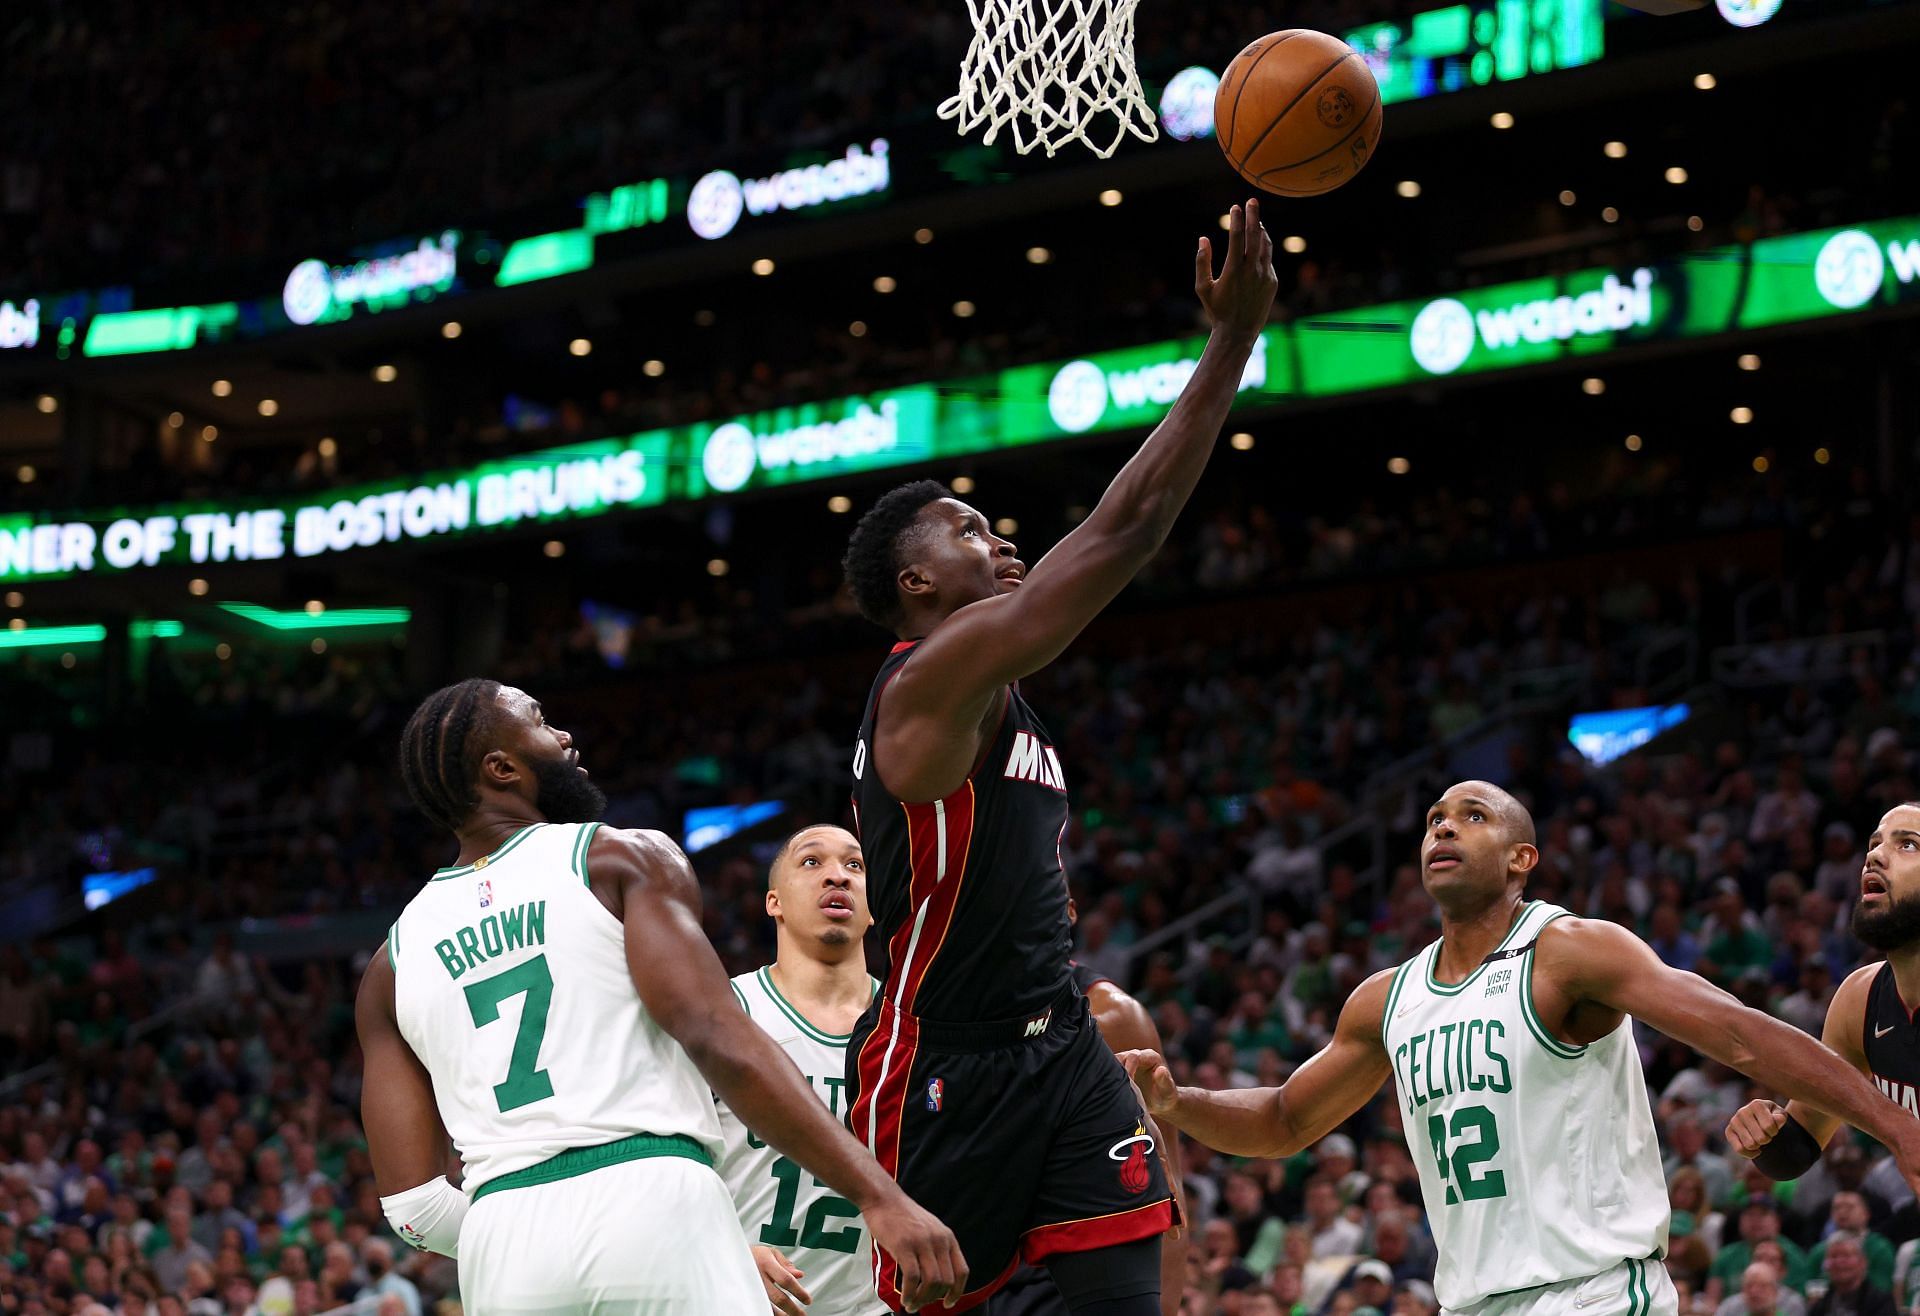 The Miami Heat will host the Boston Celtcis for Game 5 on May 25.